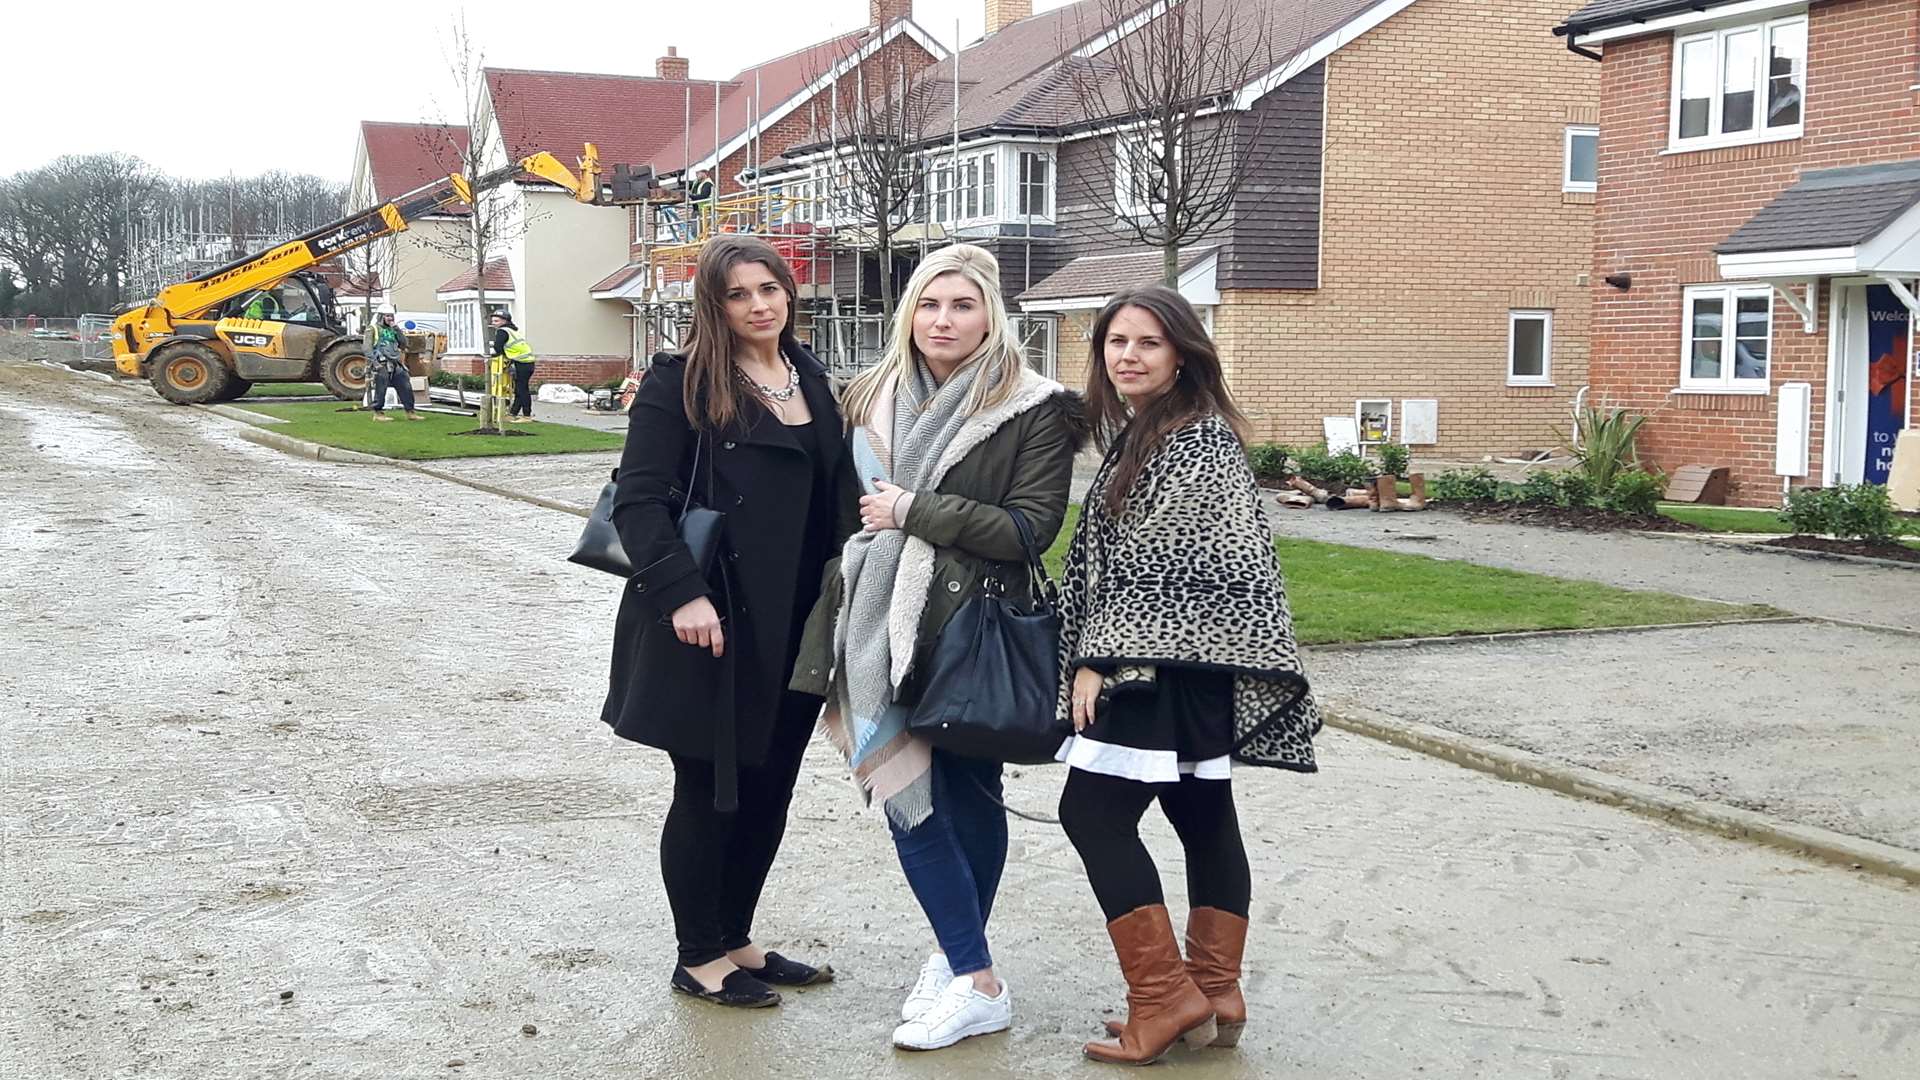 Helen Batt, Kelly Terry and Michelle Brown all had to delay plans to move into Bovis Homes at the last minute